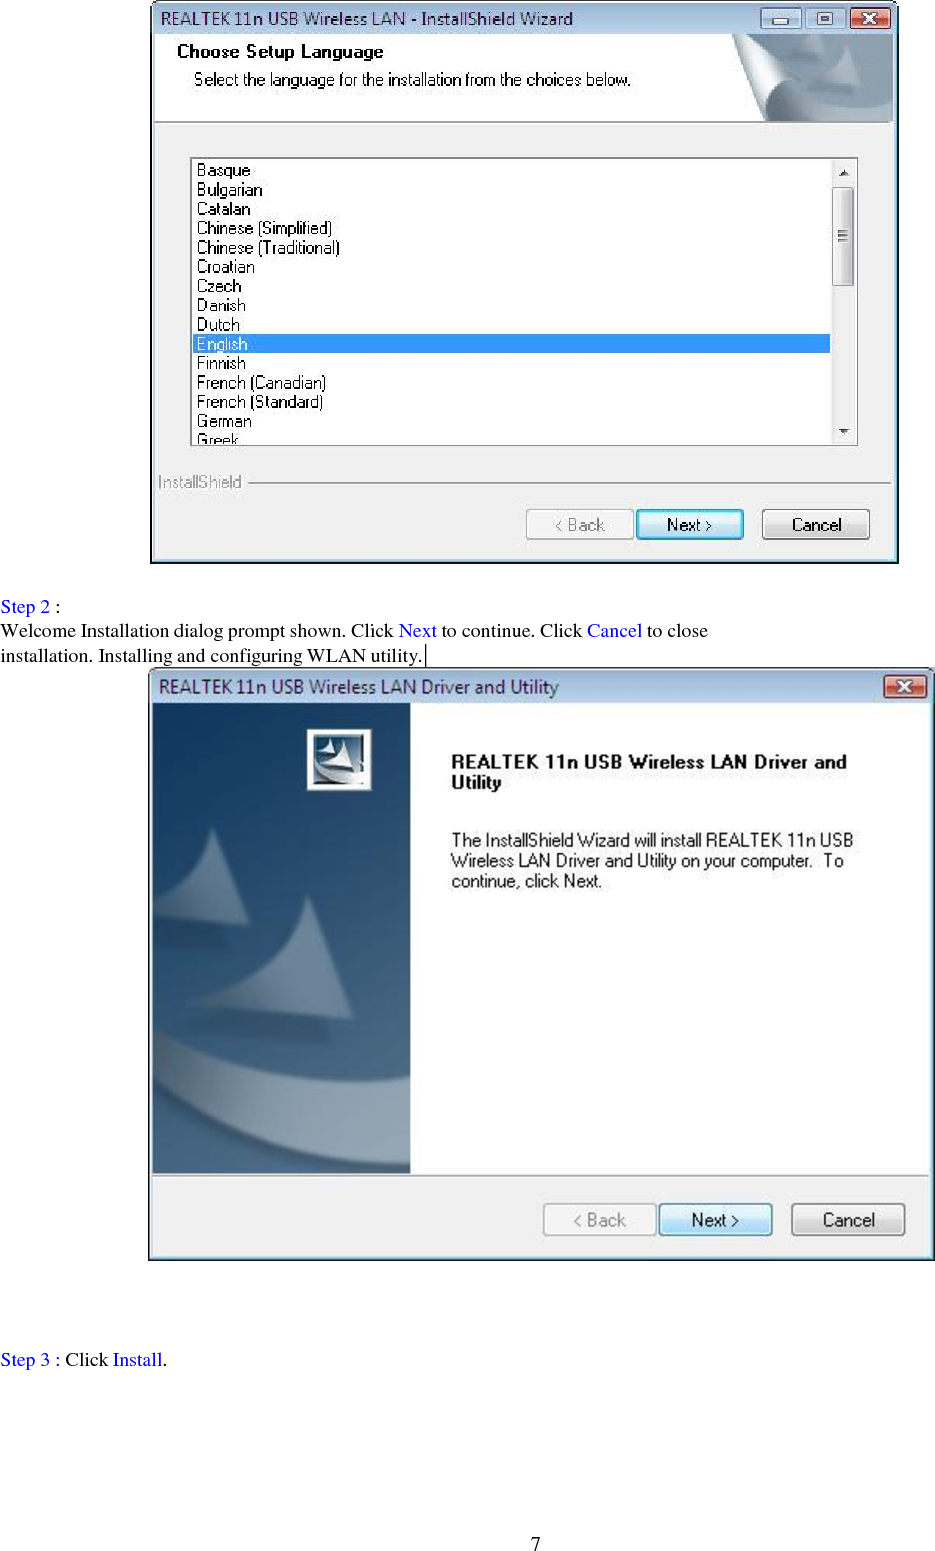      Step 2 : Welcome Installation dialog prompt shown. Click Next to continue. Click Cancel to close installation. Installing and configuring WLAN utility.                                 Step 3 : Click Install.         7 